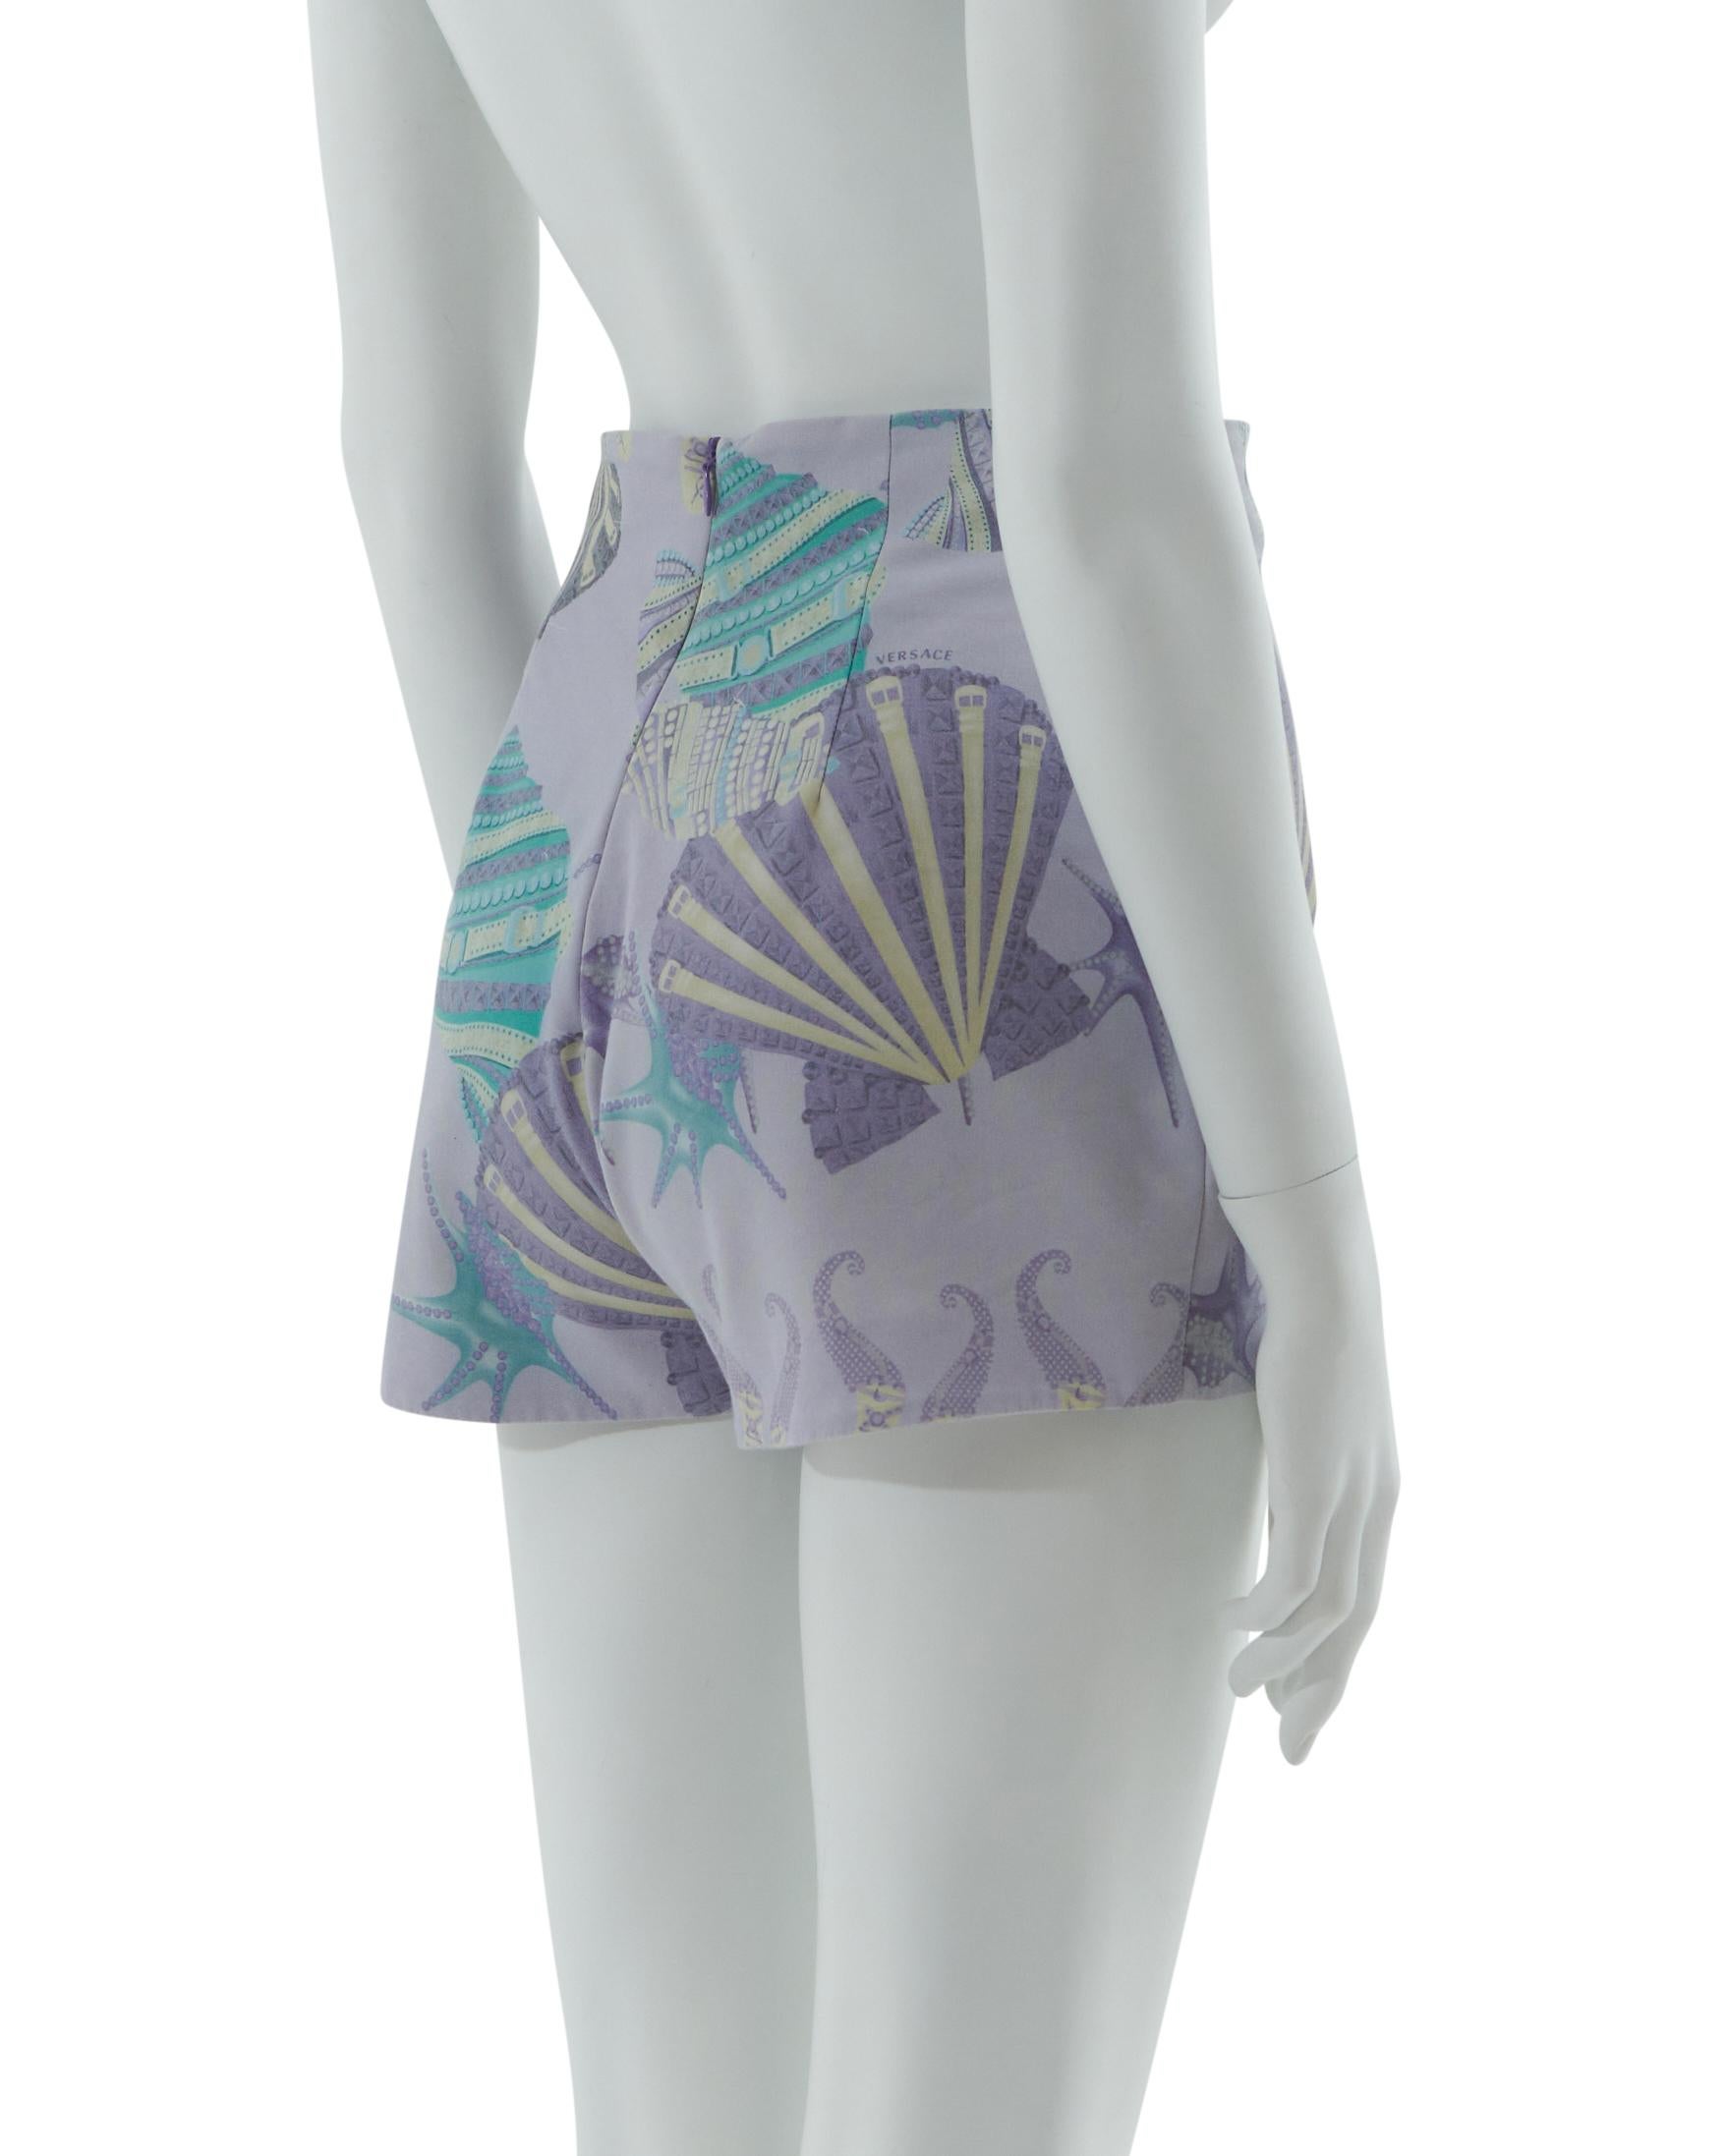 - Spring Summer 2012 
- Sold by Skof.Archive
- Runway look 7 
- Designed by Donatella 
- Seashell printed shorts 
- Two pockets and inner wire detail at side seams 
- Hight waist 
- Fitted to the body 
- Made in Italy 

Condition: